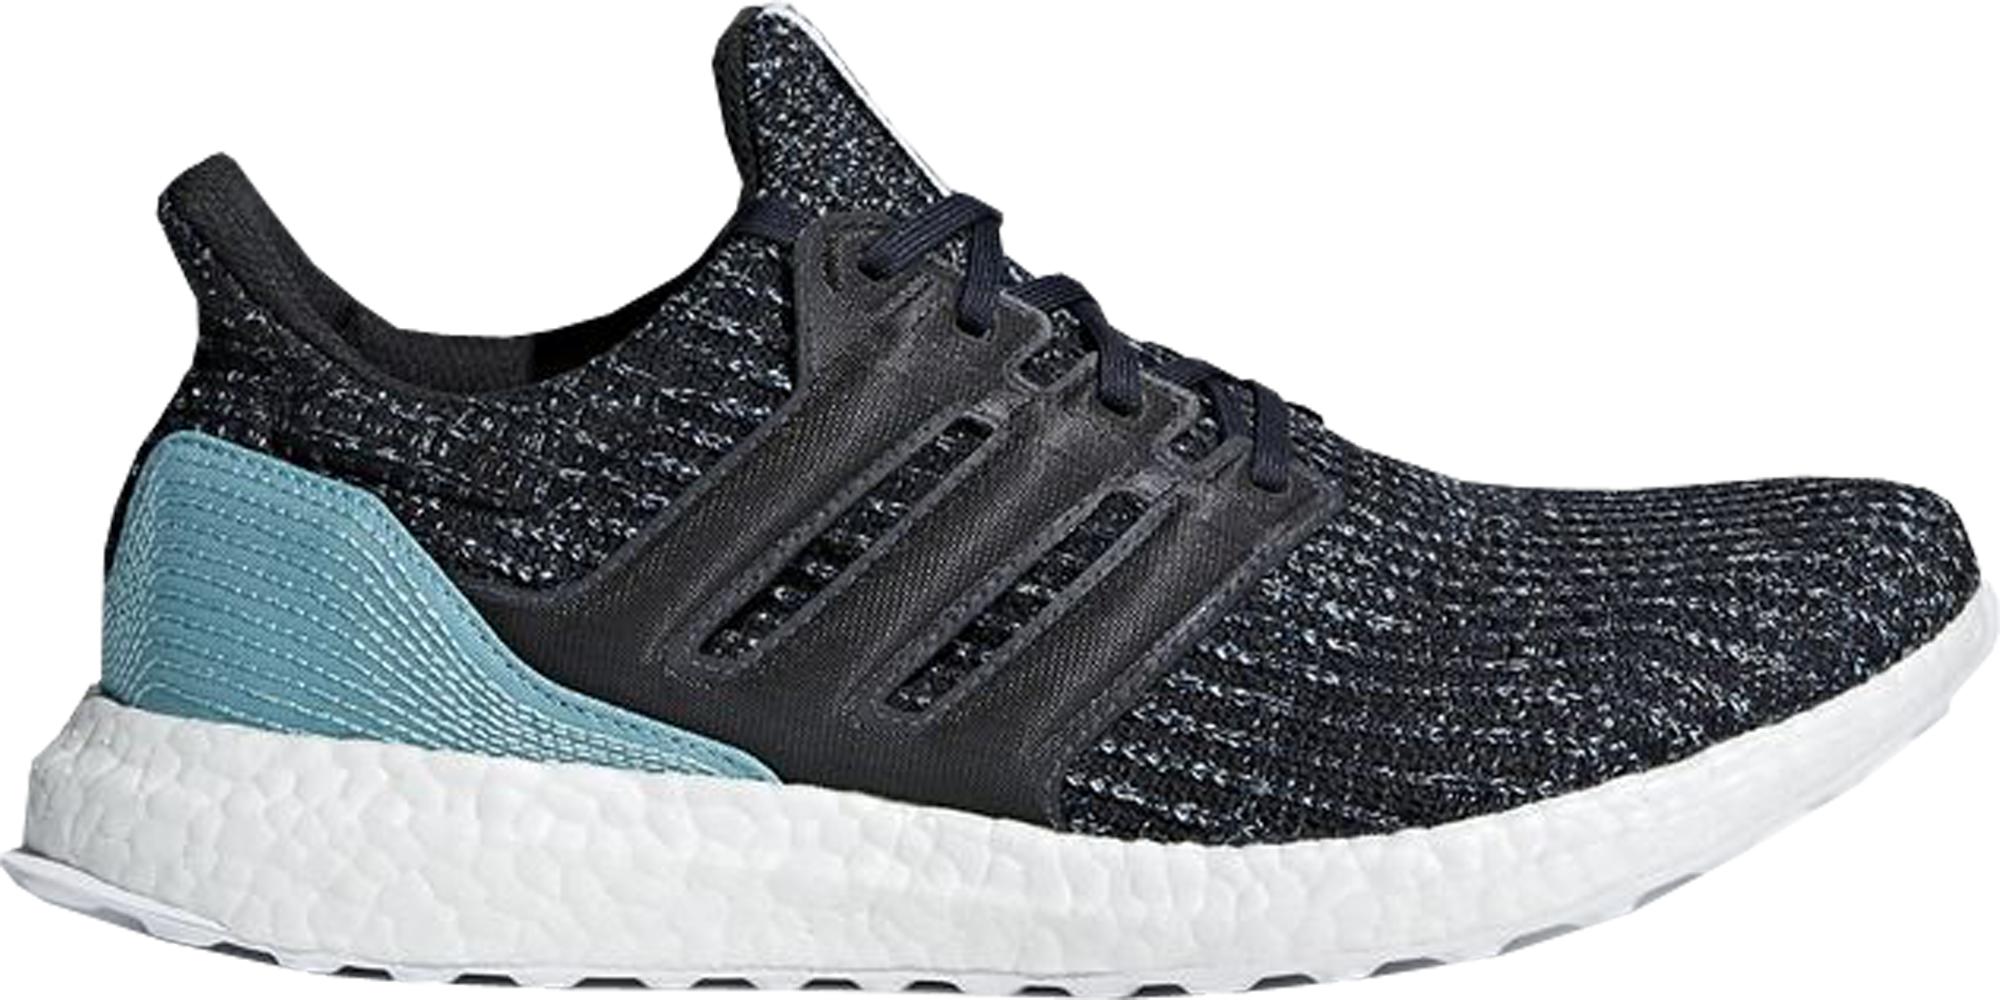 adidas Ultra Boost Parley Carbon